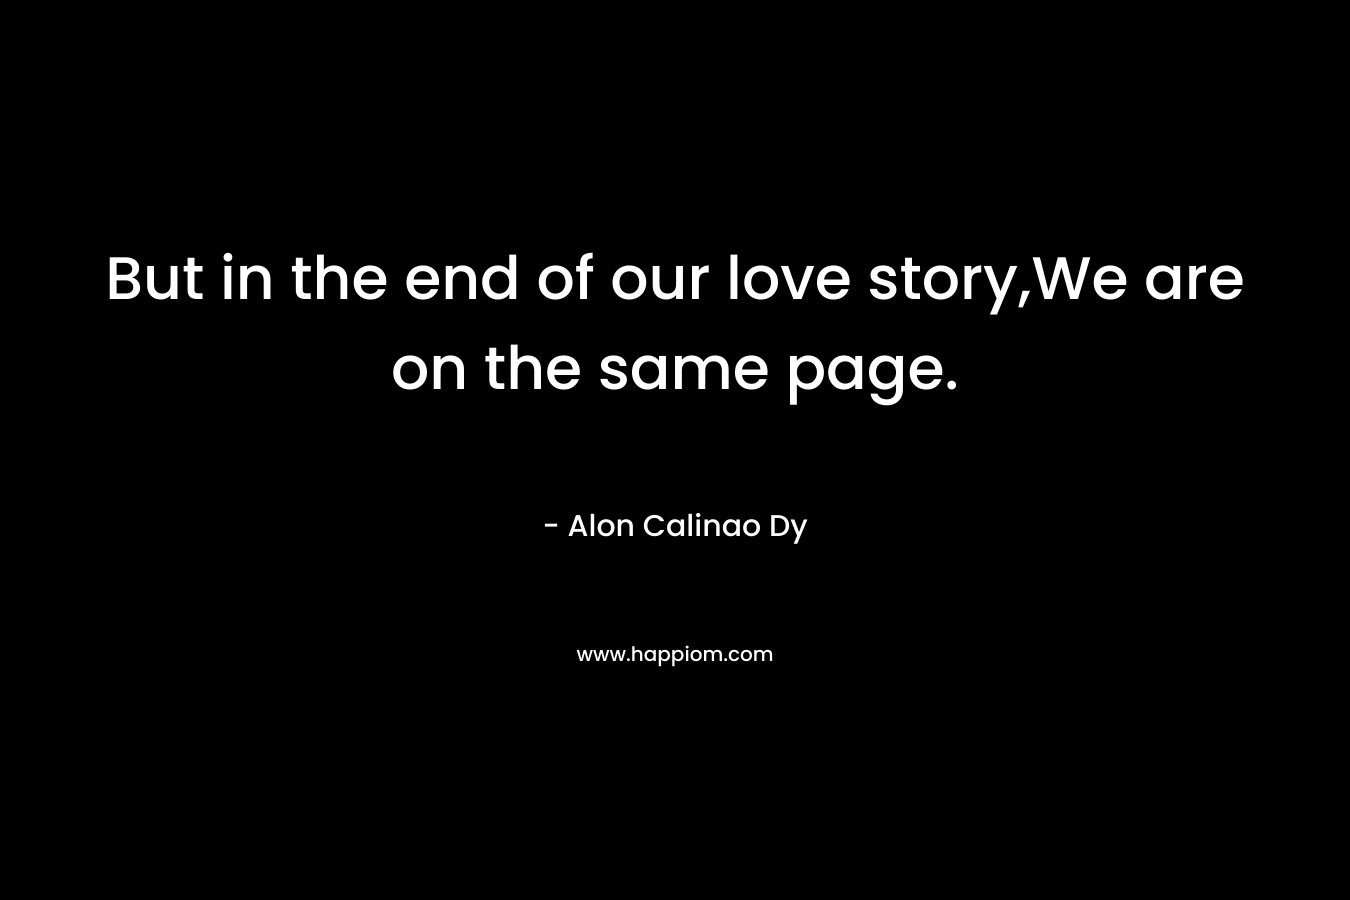 But in the end of our love story,We are on the same page.